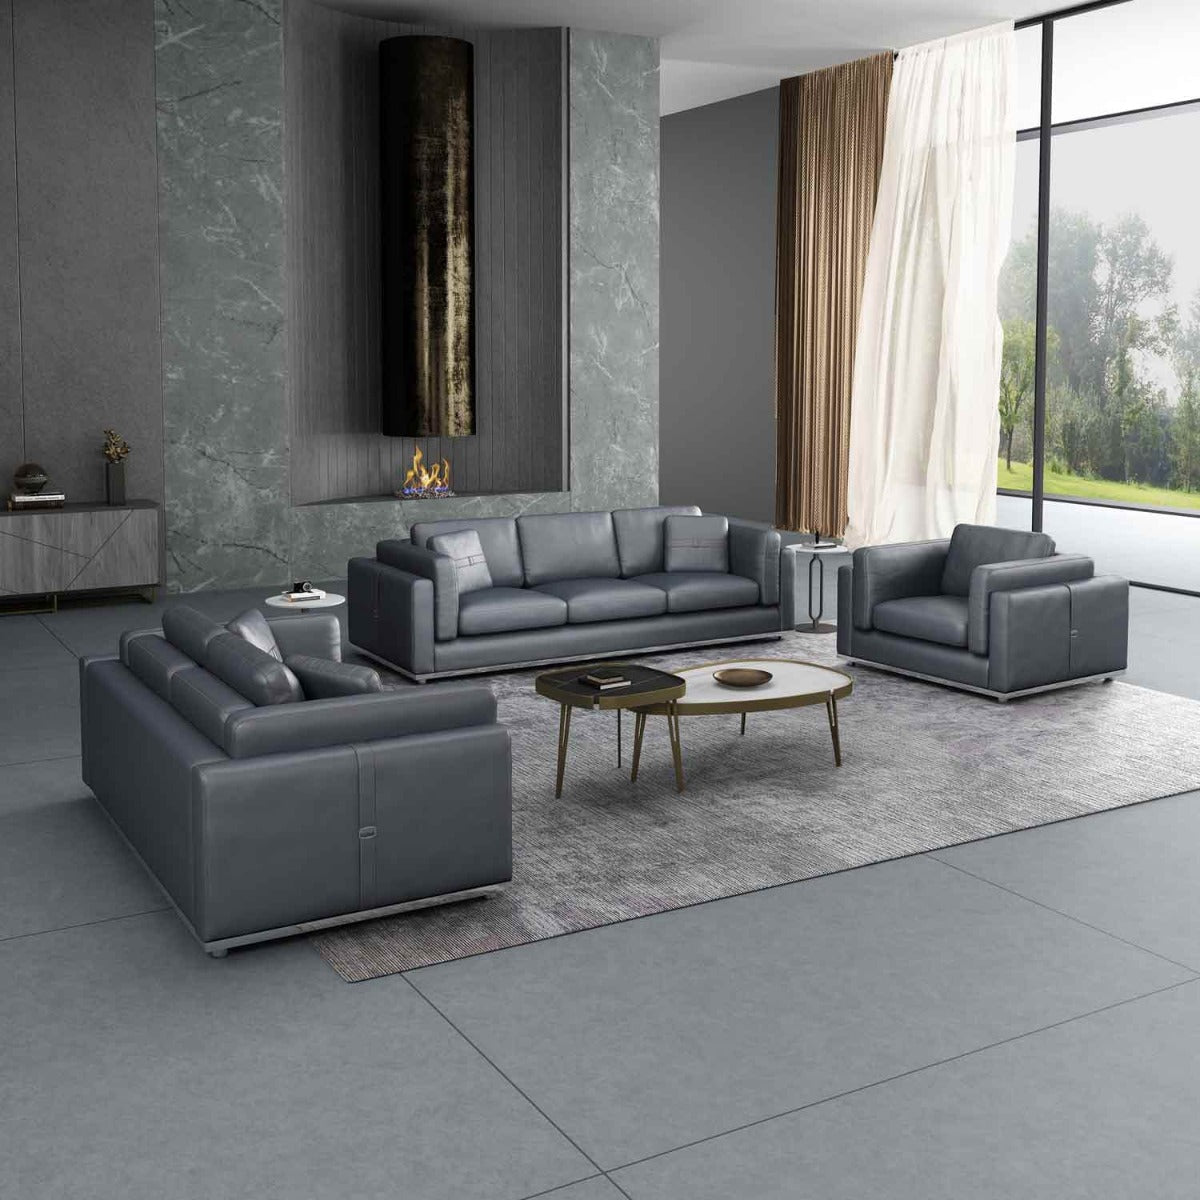 European Furniture - Picasso 3 Piece Living Room Set in Smokey Gray - 25550-3SET - New Star Living